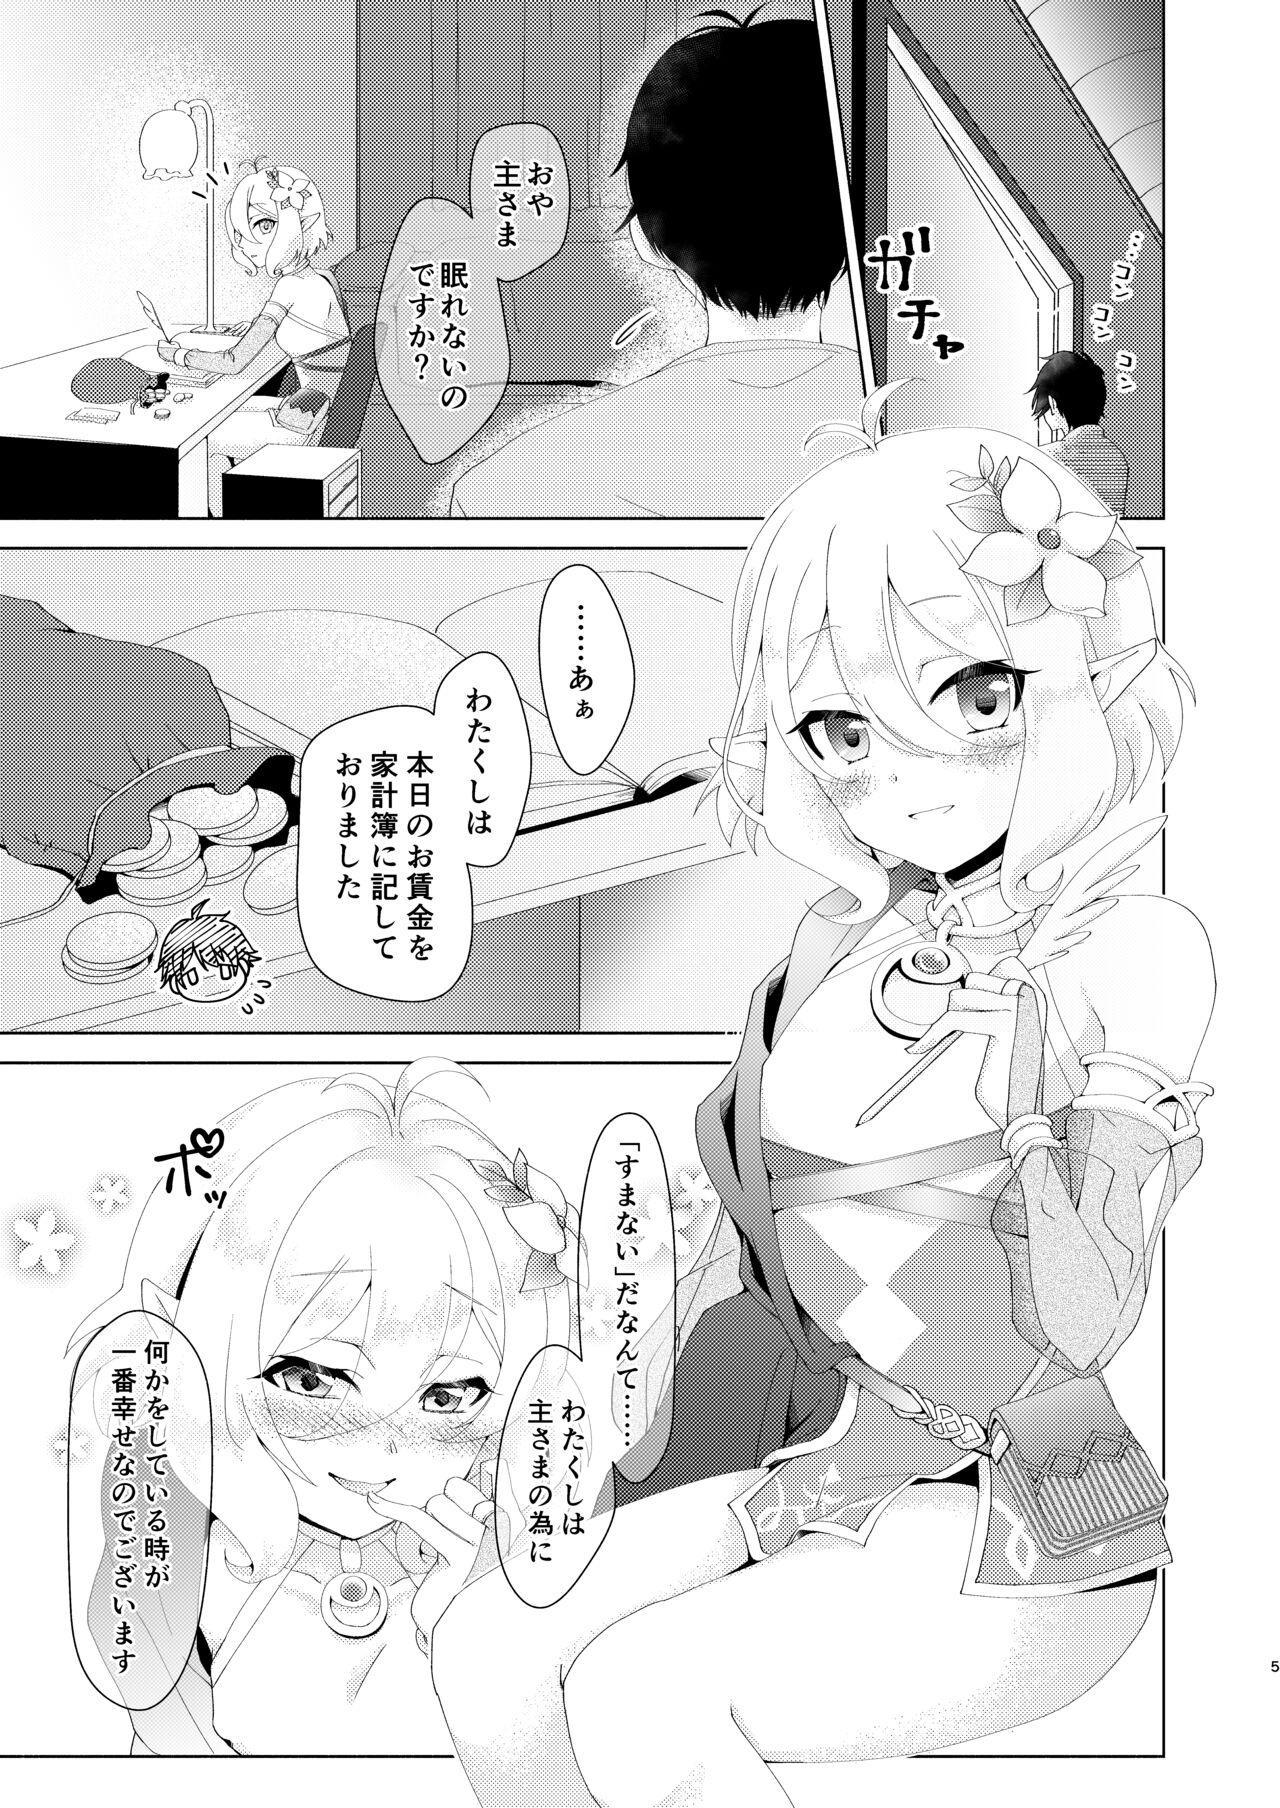 Shy Yandere Connect - Princess connect Blondes - Page 3